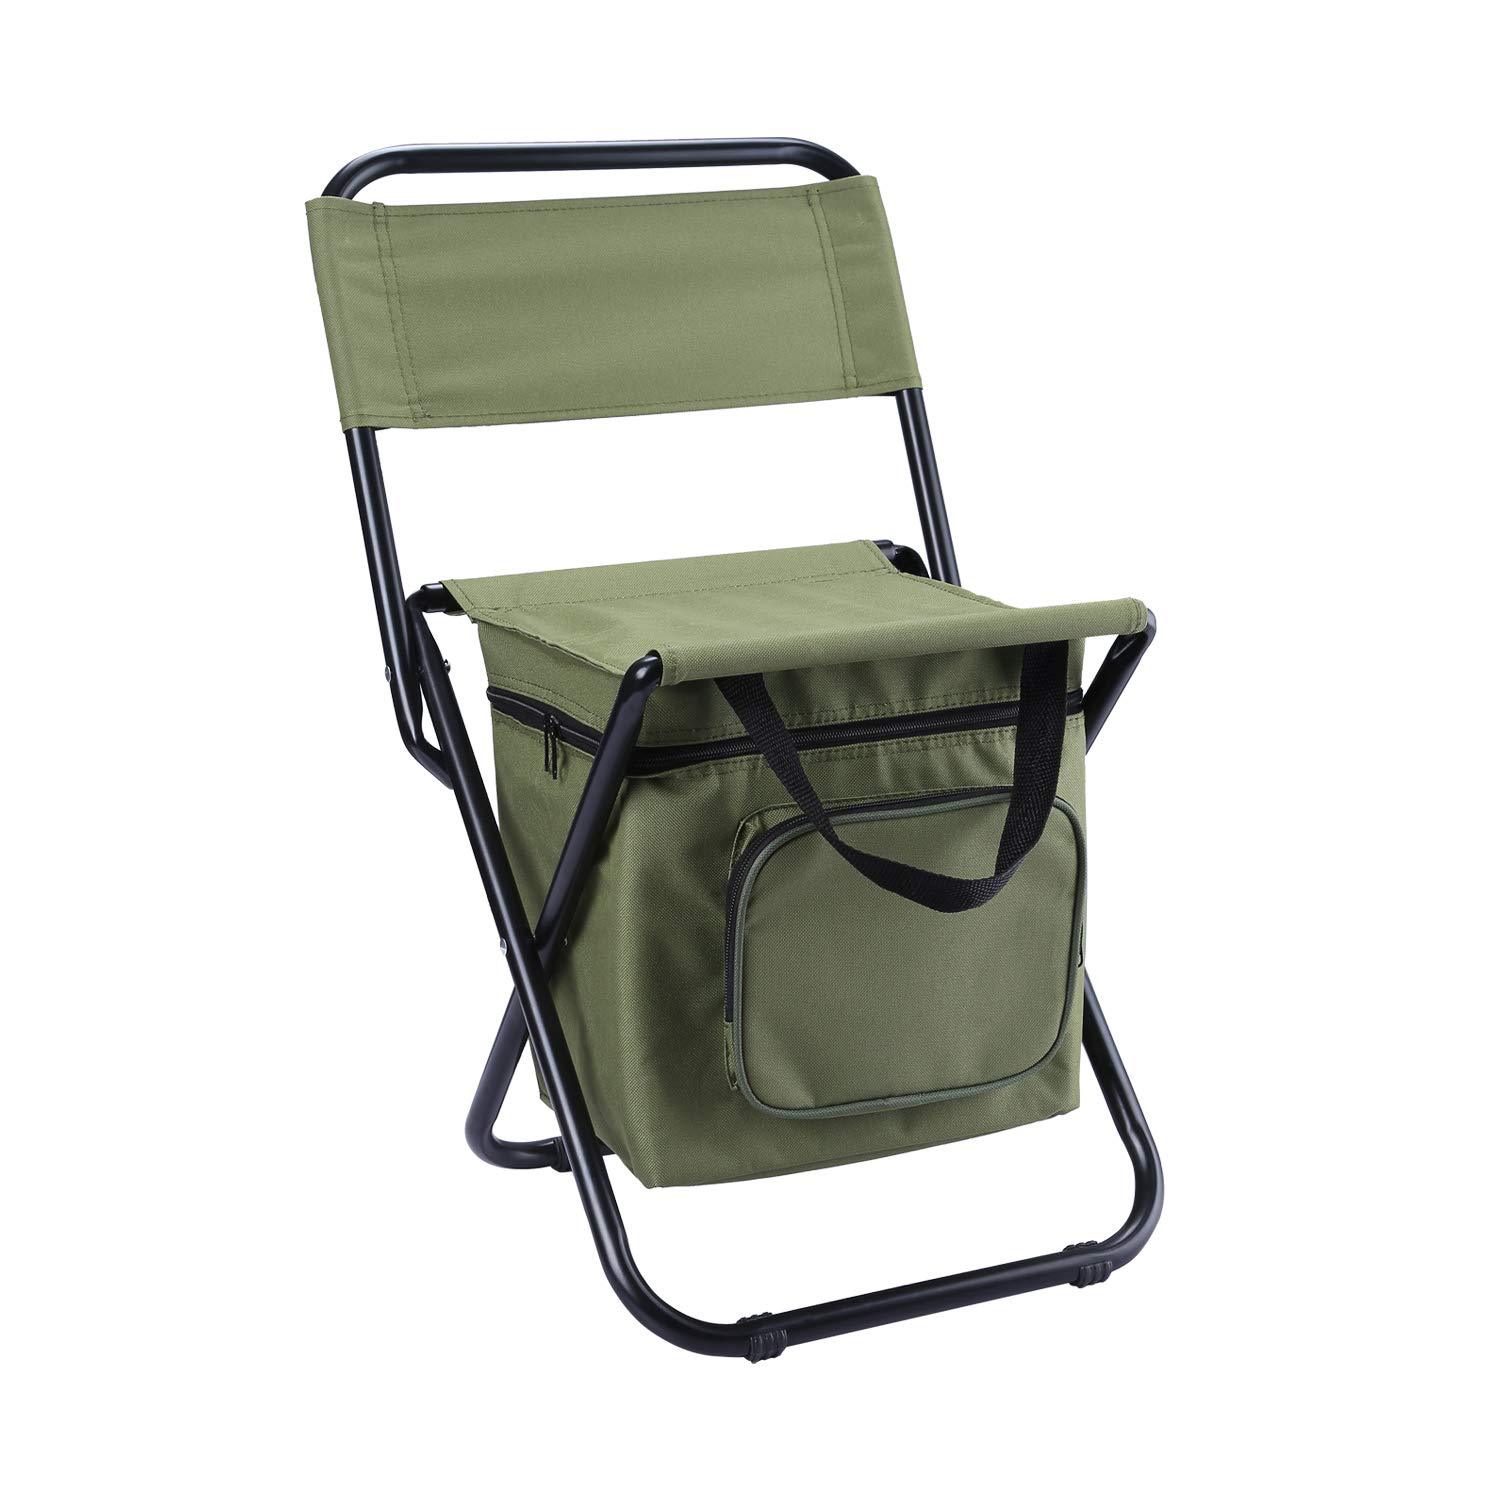 Portable Outdoor Folding Ice Pack Chair with Storage Bag with Backrest Insulation 3-in-1 Leisure Camping Fishing Chair